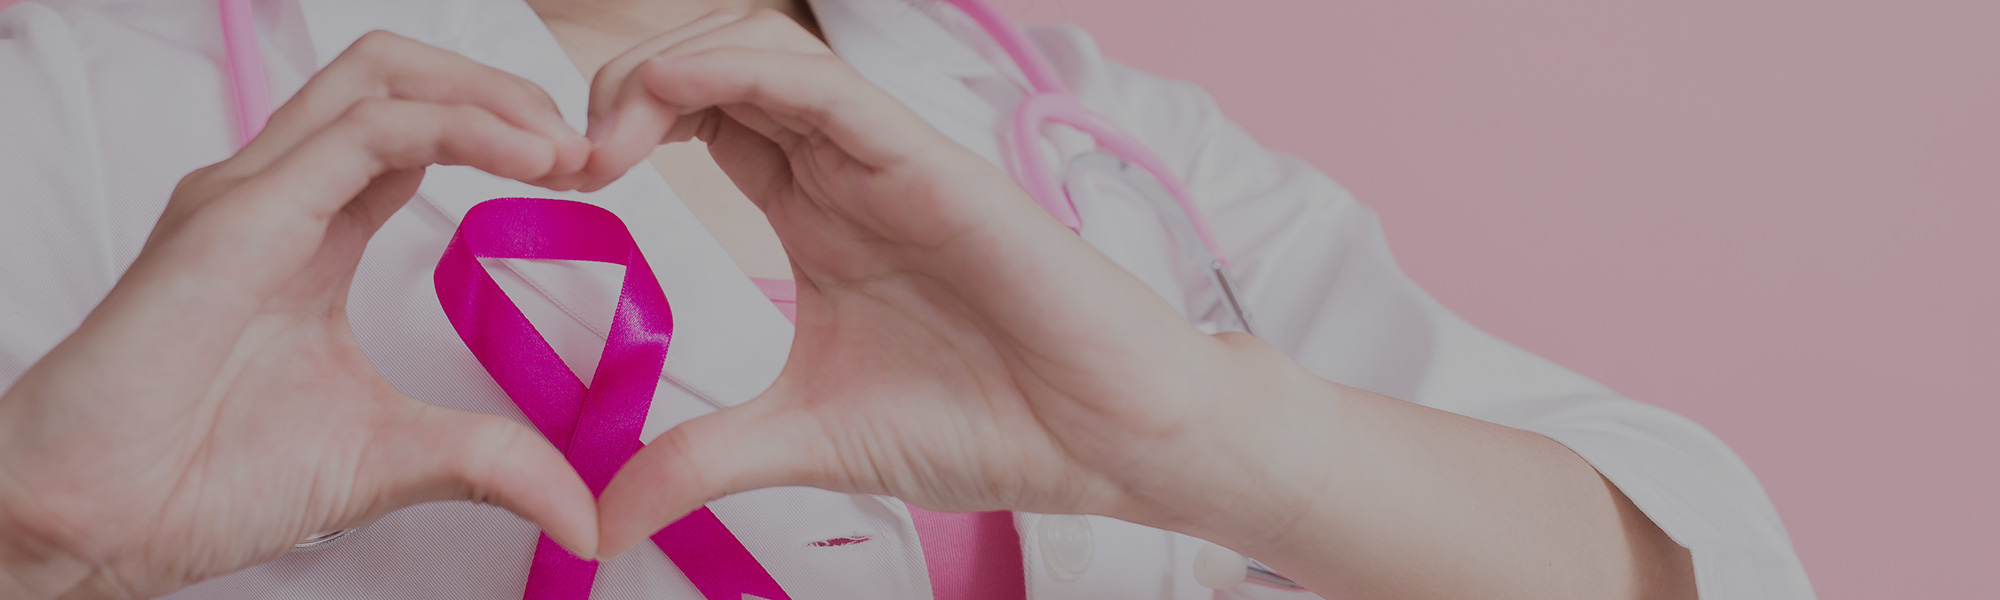 Doctor holding hands in a heart shape around a pink breast cancer awareness ribbon